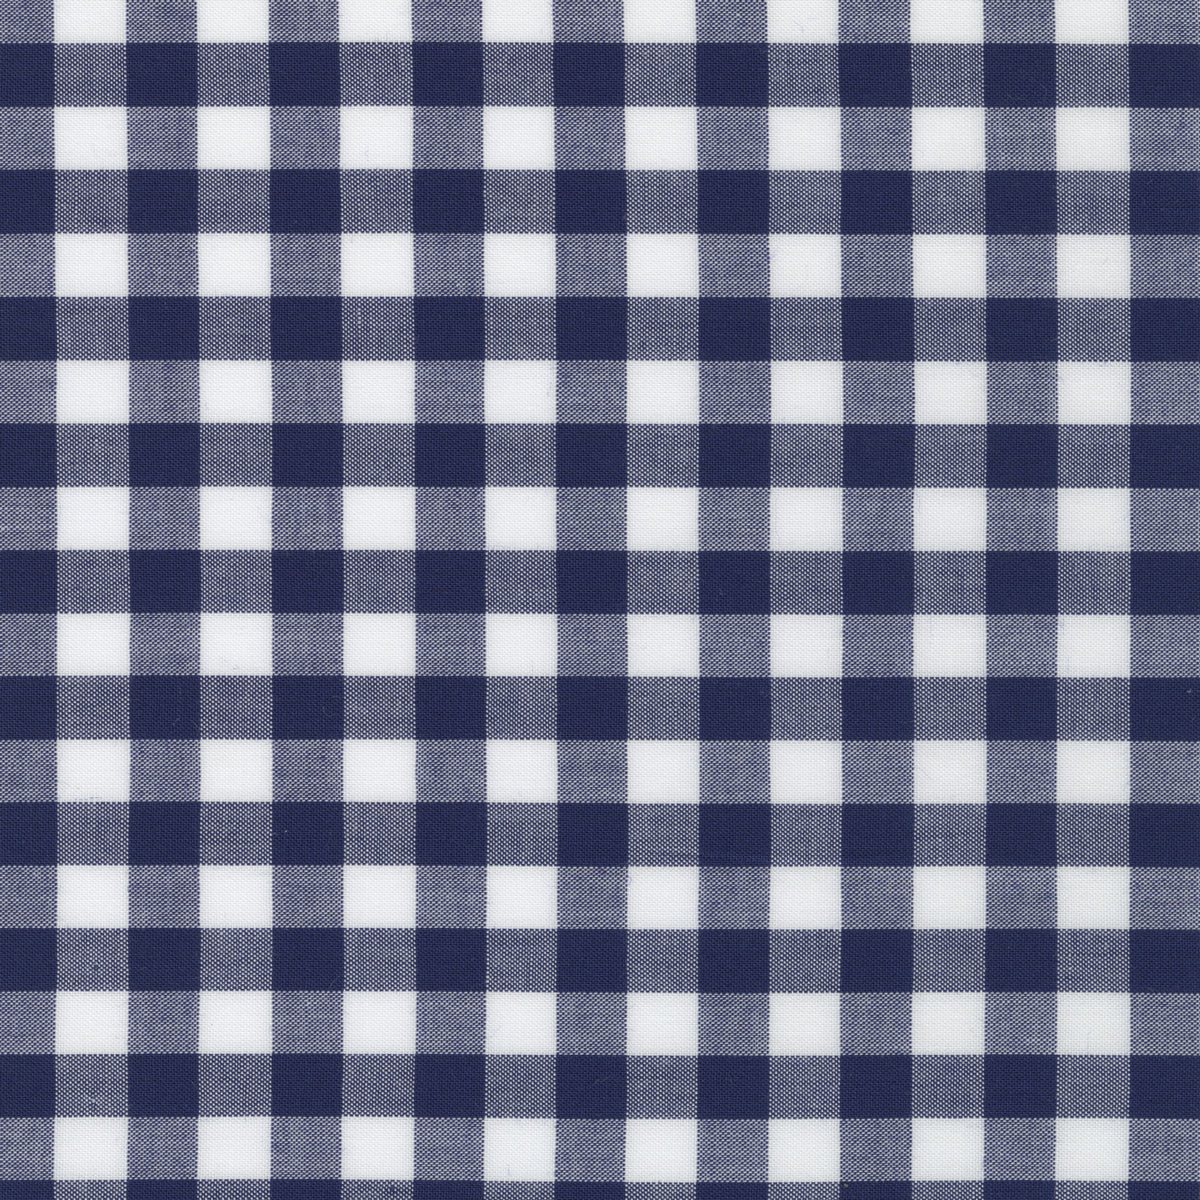 Made-to-Measure Shirt in Navy Gingham Poplin